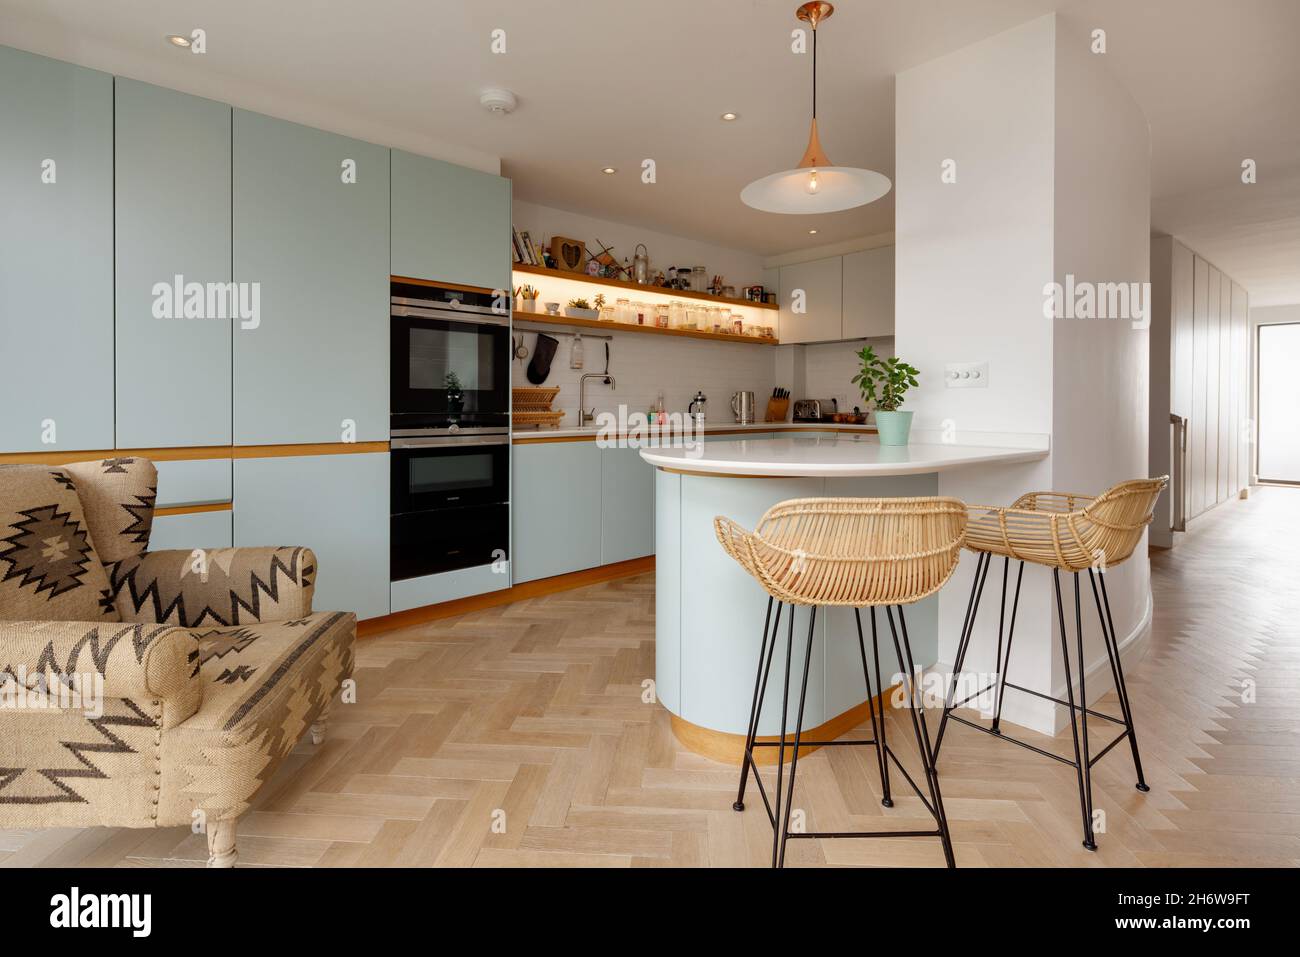 Dry Drayton, England - August 2 2019: Contemporary breakfast bar with complimentary stools within modern house kitchen room, fitted cupboards and buil Stock Photo